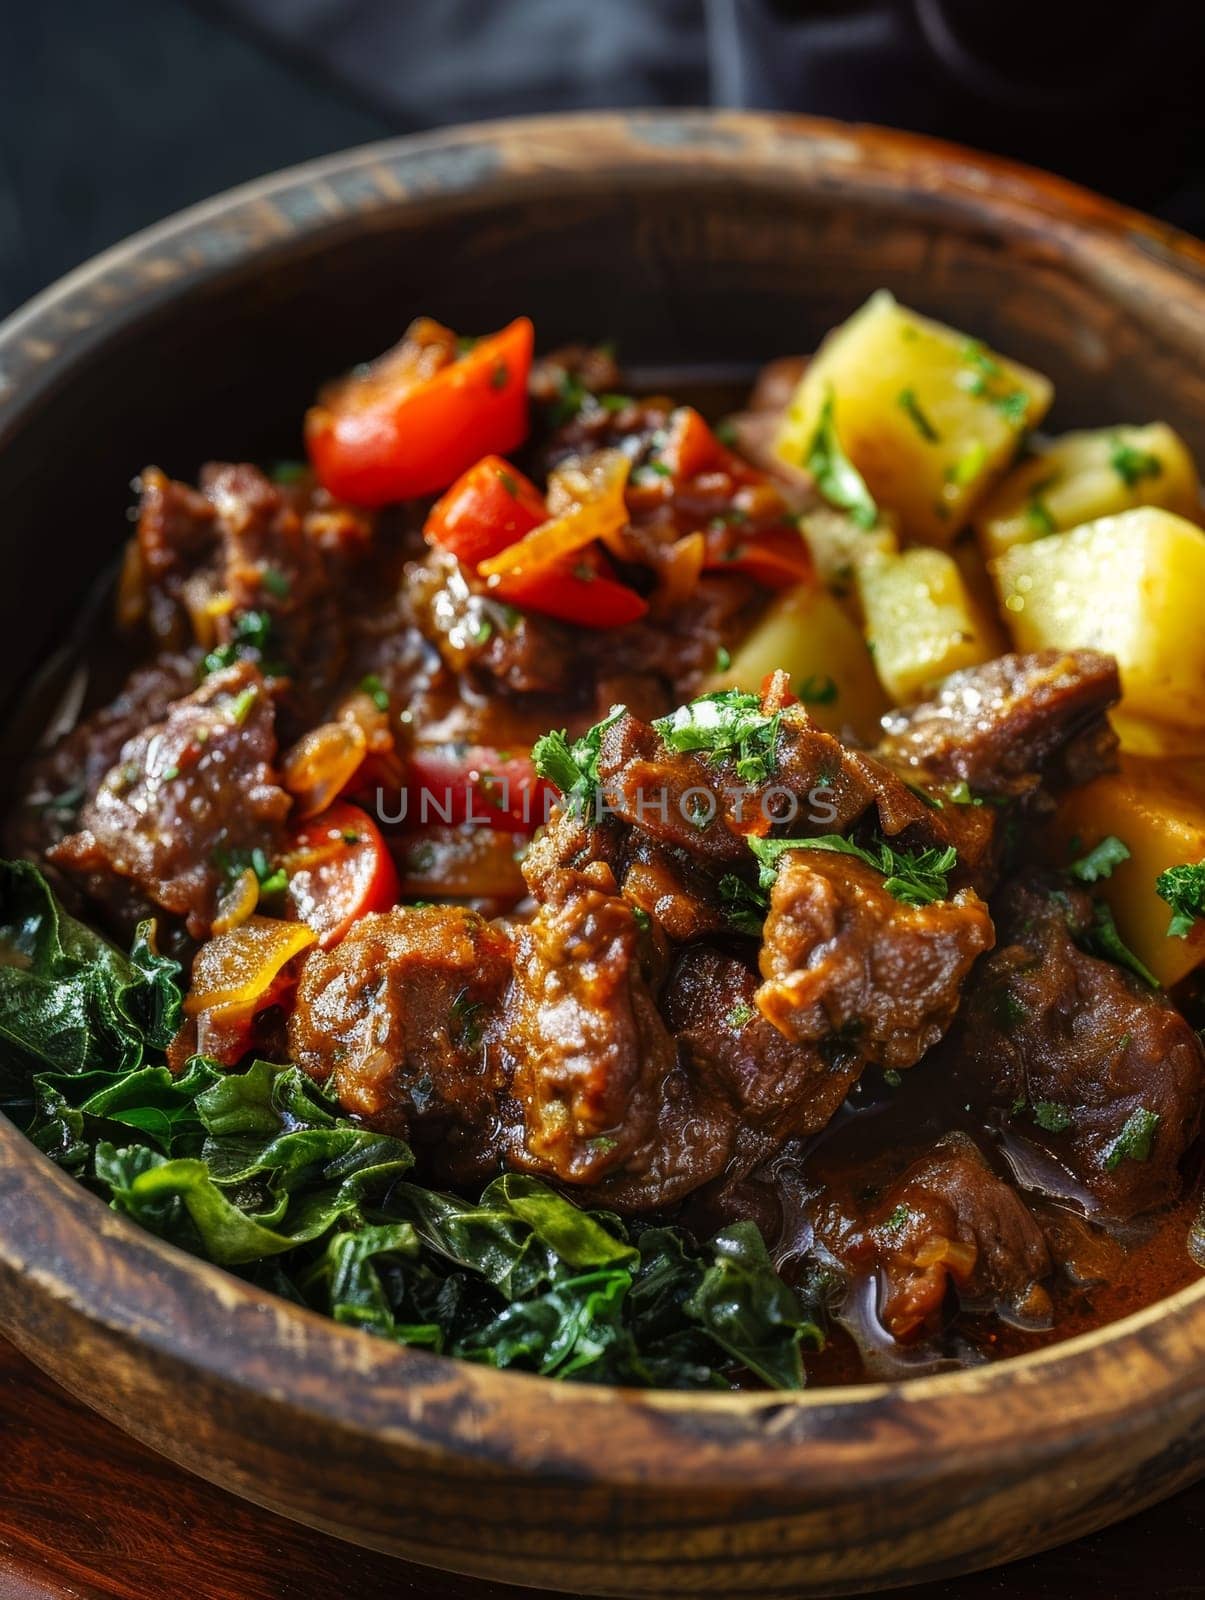 Zimbabwean sadza in a wooden bowl, with a side of greens and meat stew. A traditional and hearty dish from Zimbabwe. by sfinks